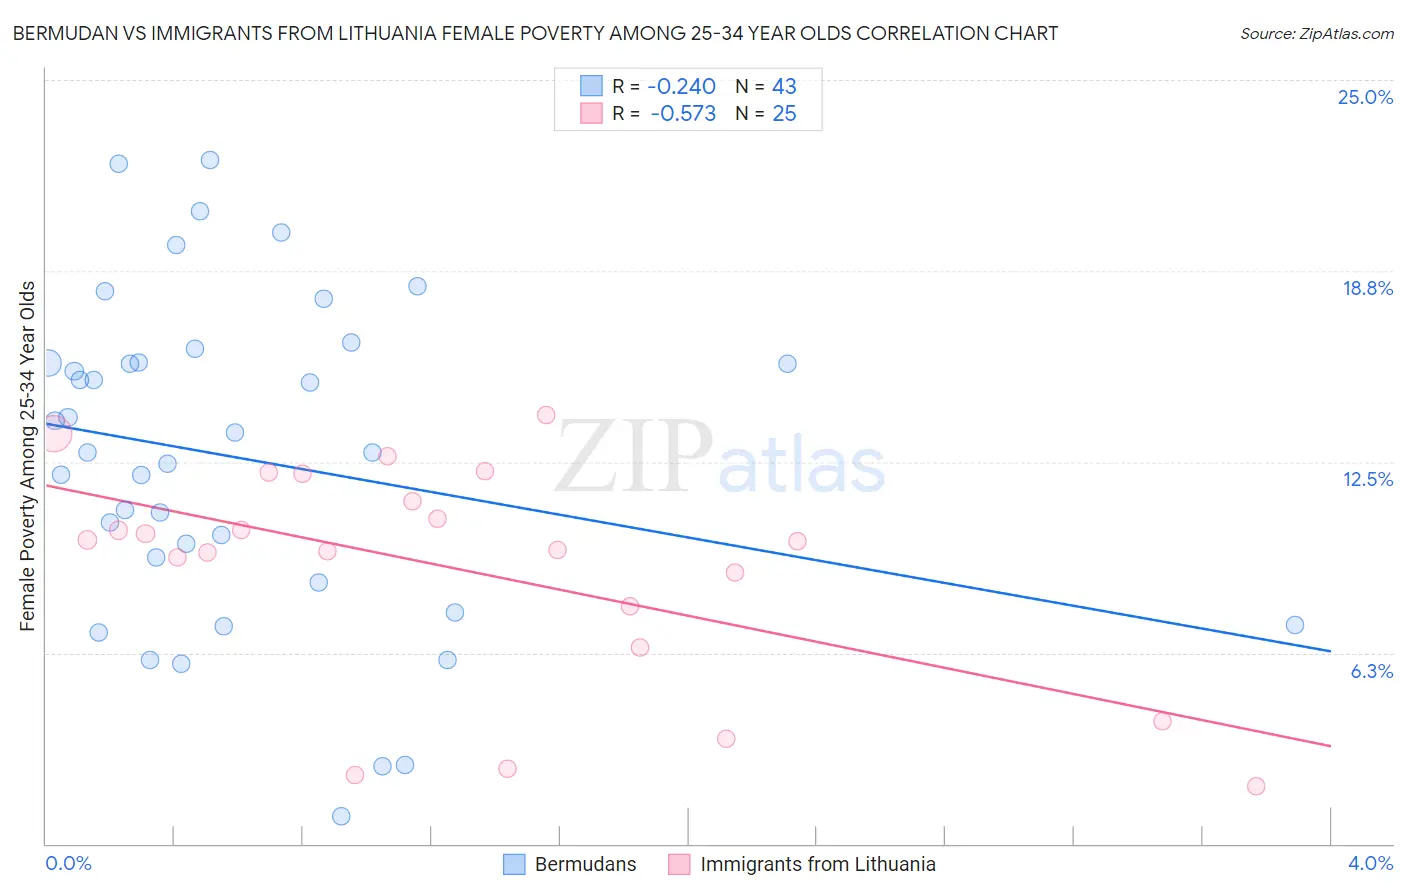 Bermudan vs Immigrants from Lithuania Female Poverty Among 25-34 Year Olds